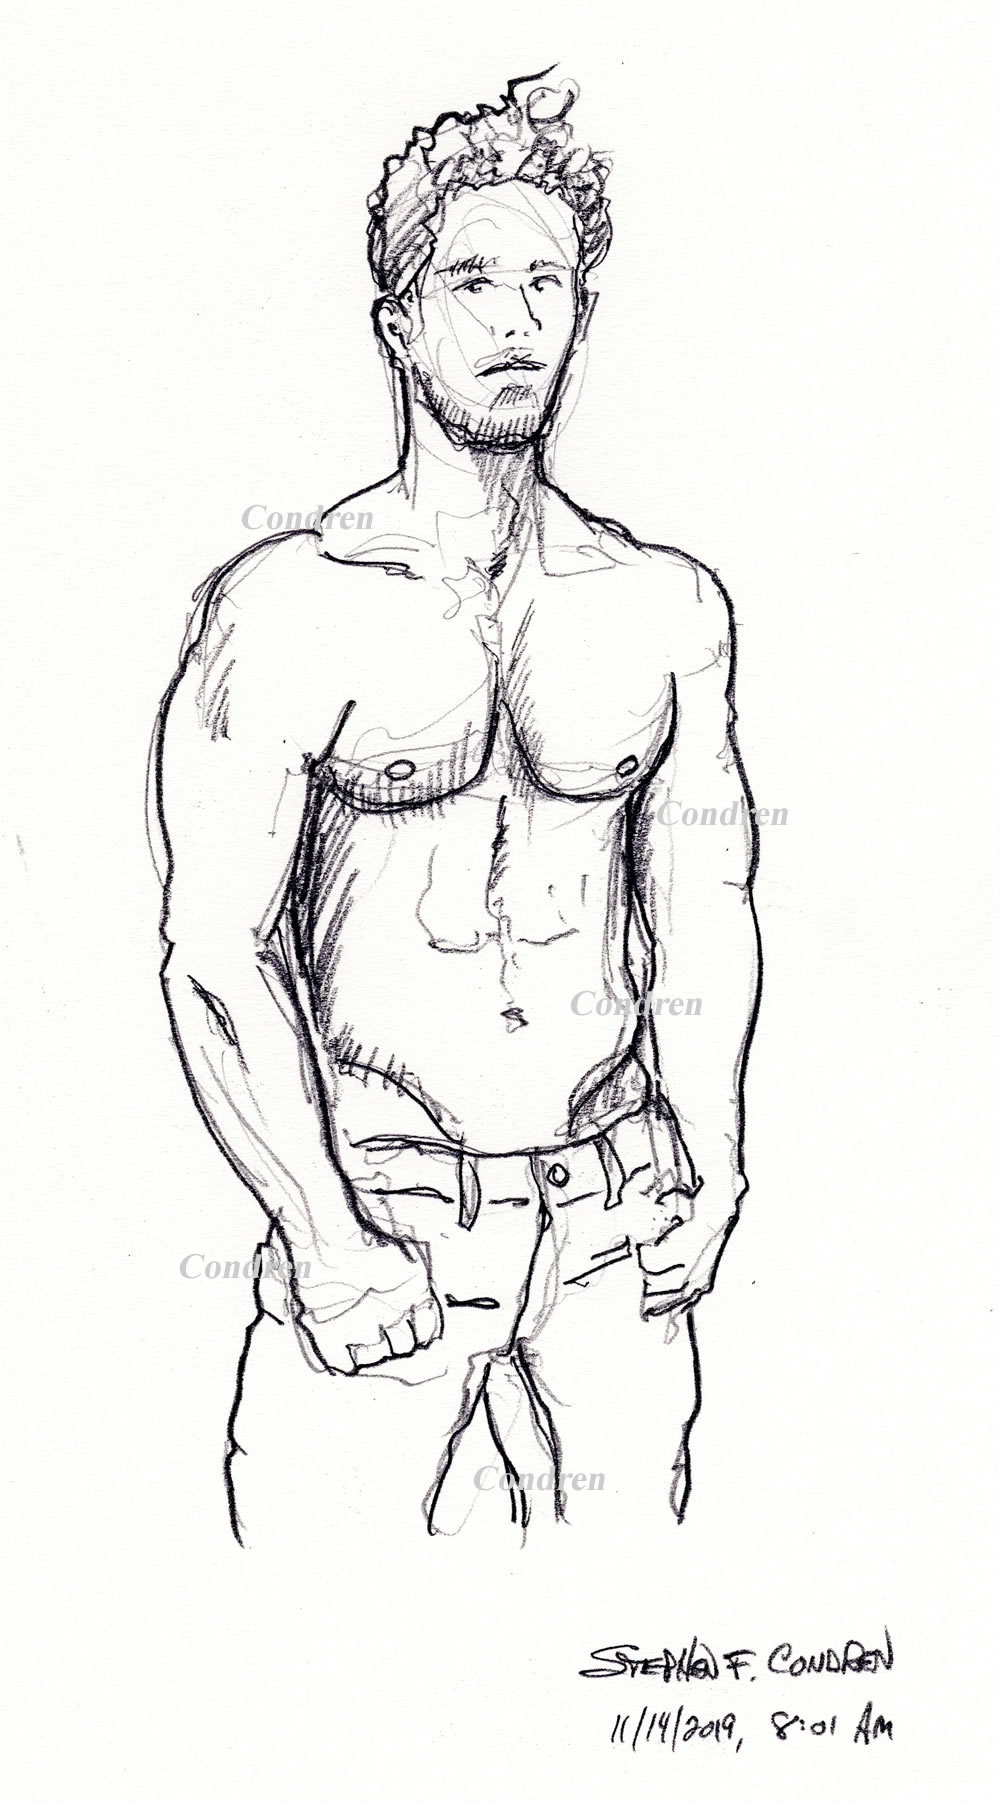 Hot shirtless male 349Z pencil figure drawing by artist Stephen F. Condren.